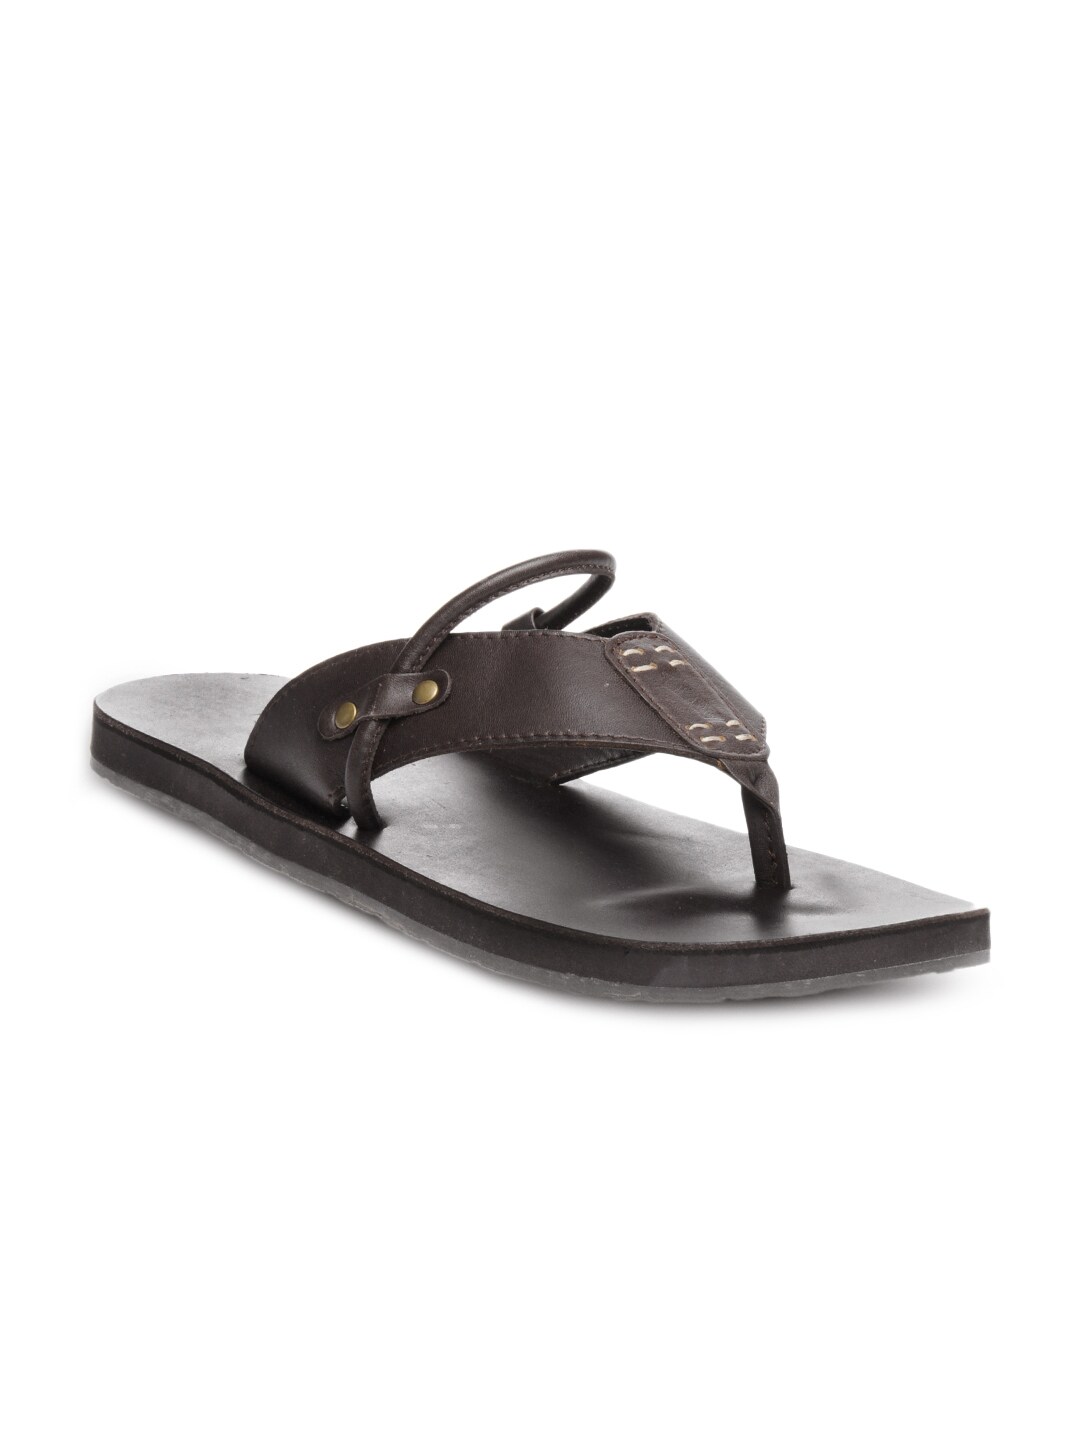 GAS Men Brown Truly Sandals